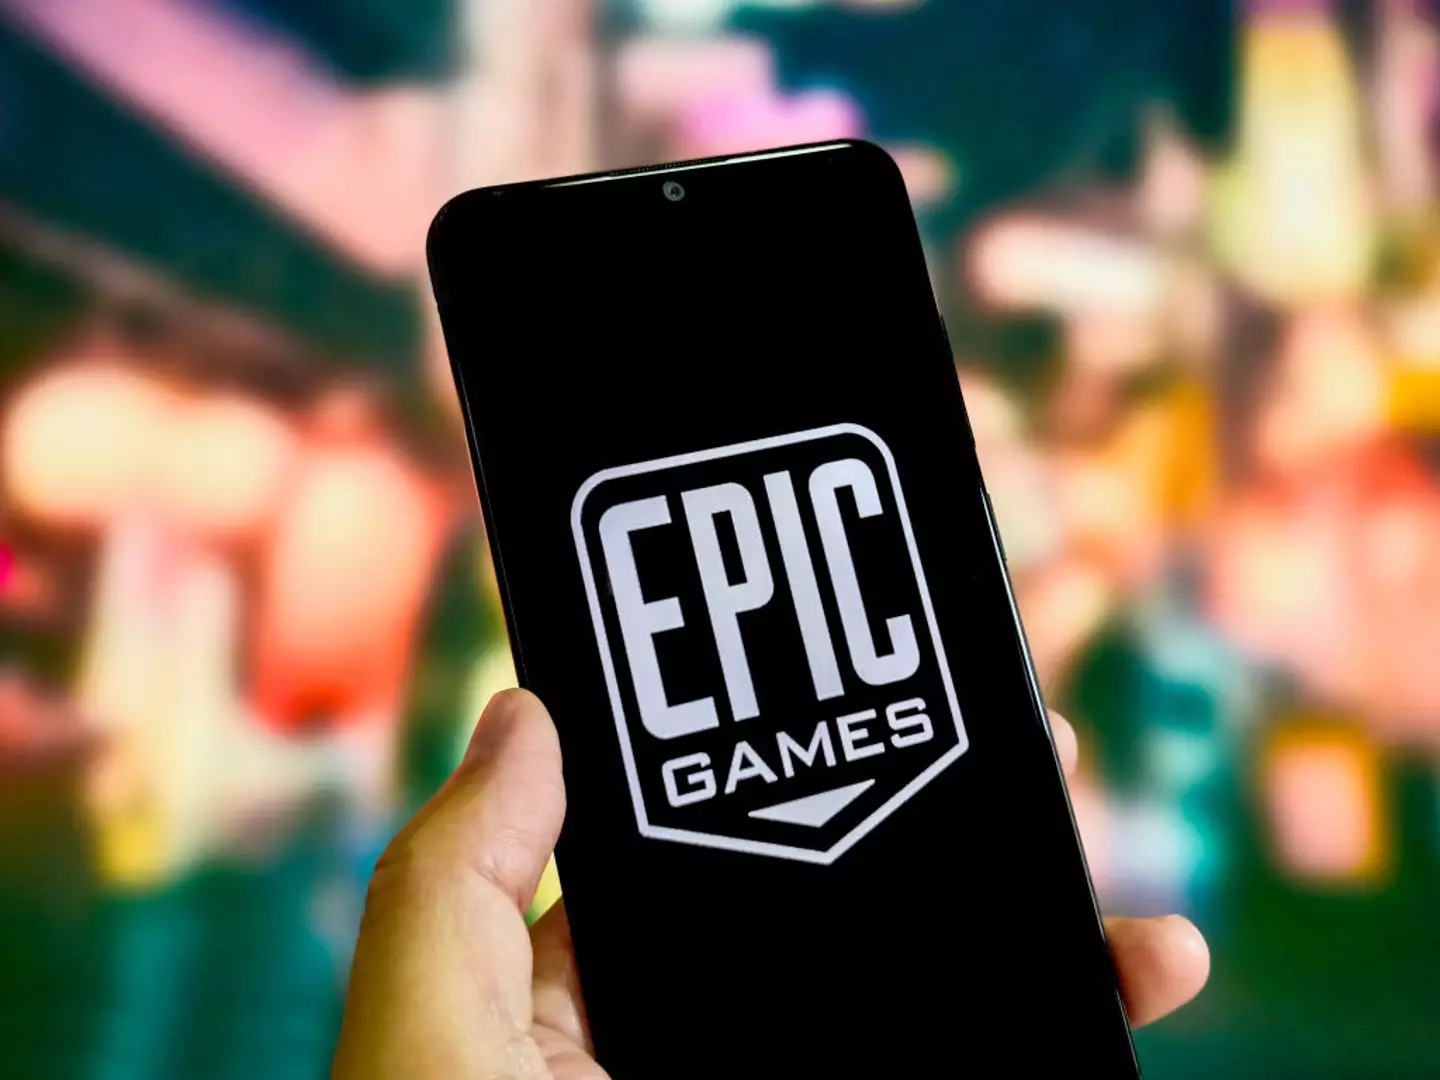 Epic Games proved victorious against Google in last week's ruling.